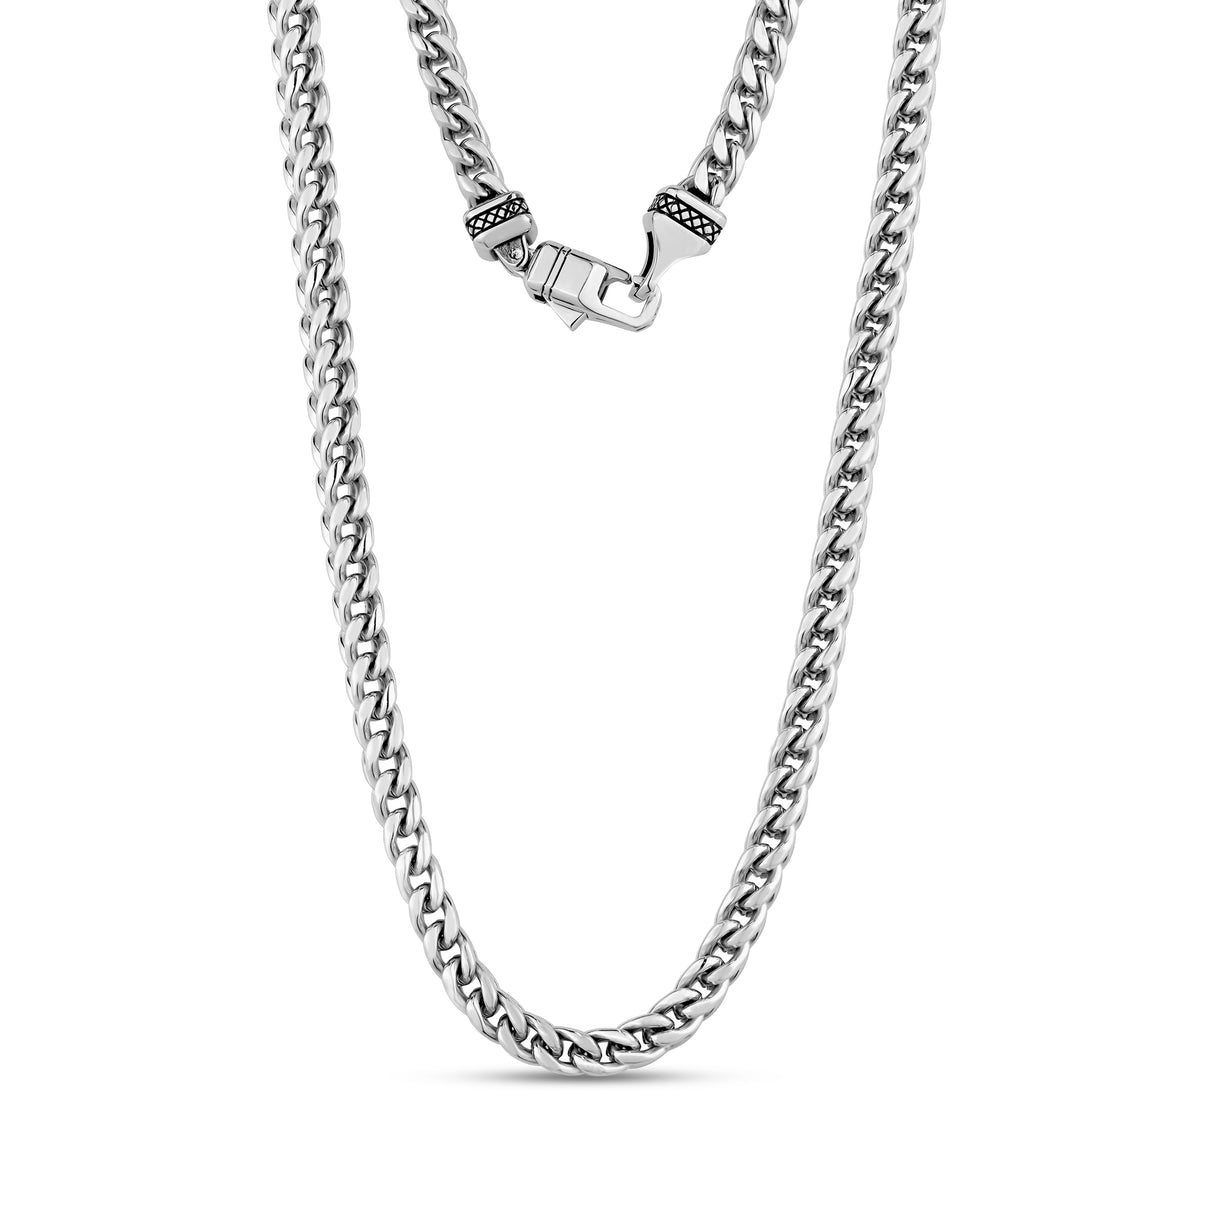 Round Franco Link Chain | 5mm - Men Necklace - The Steel Shop